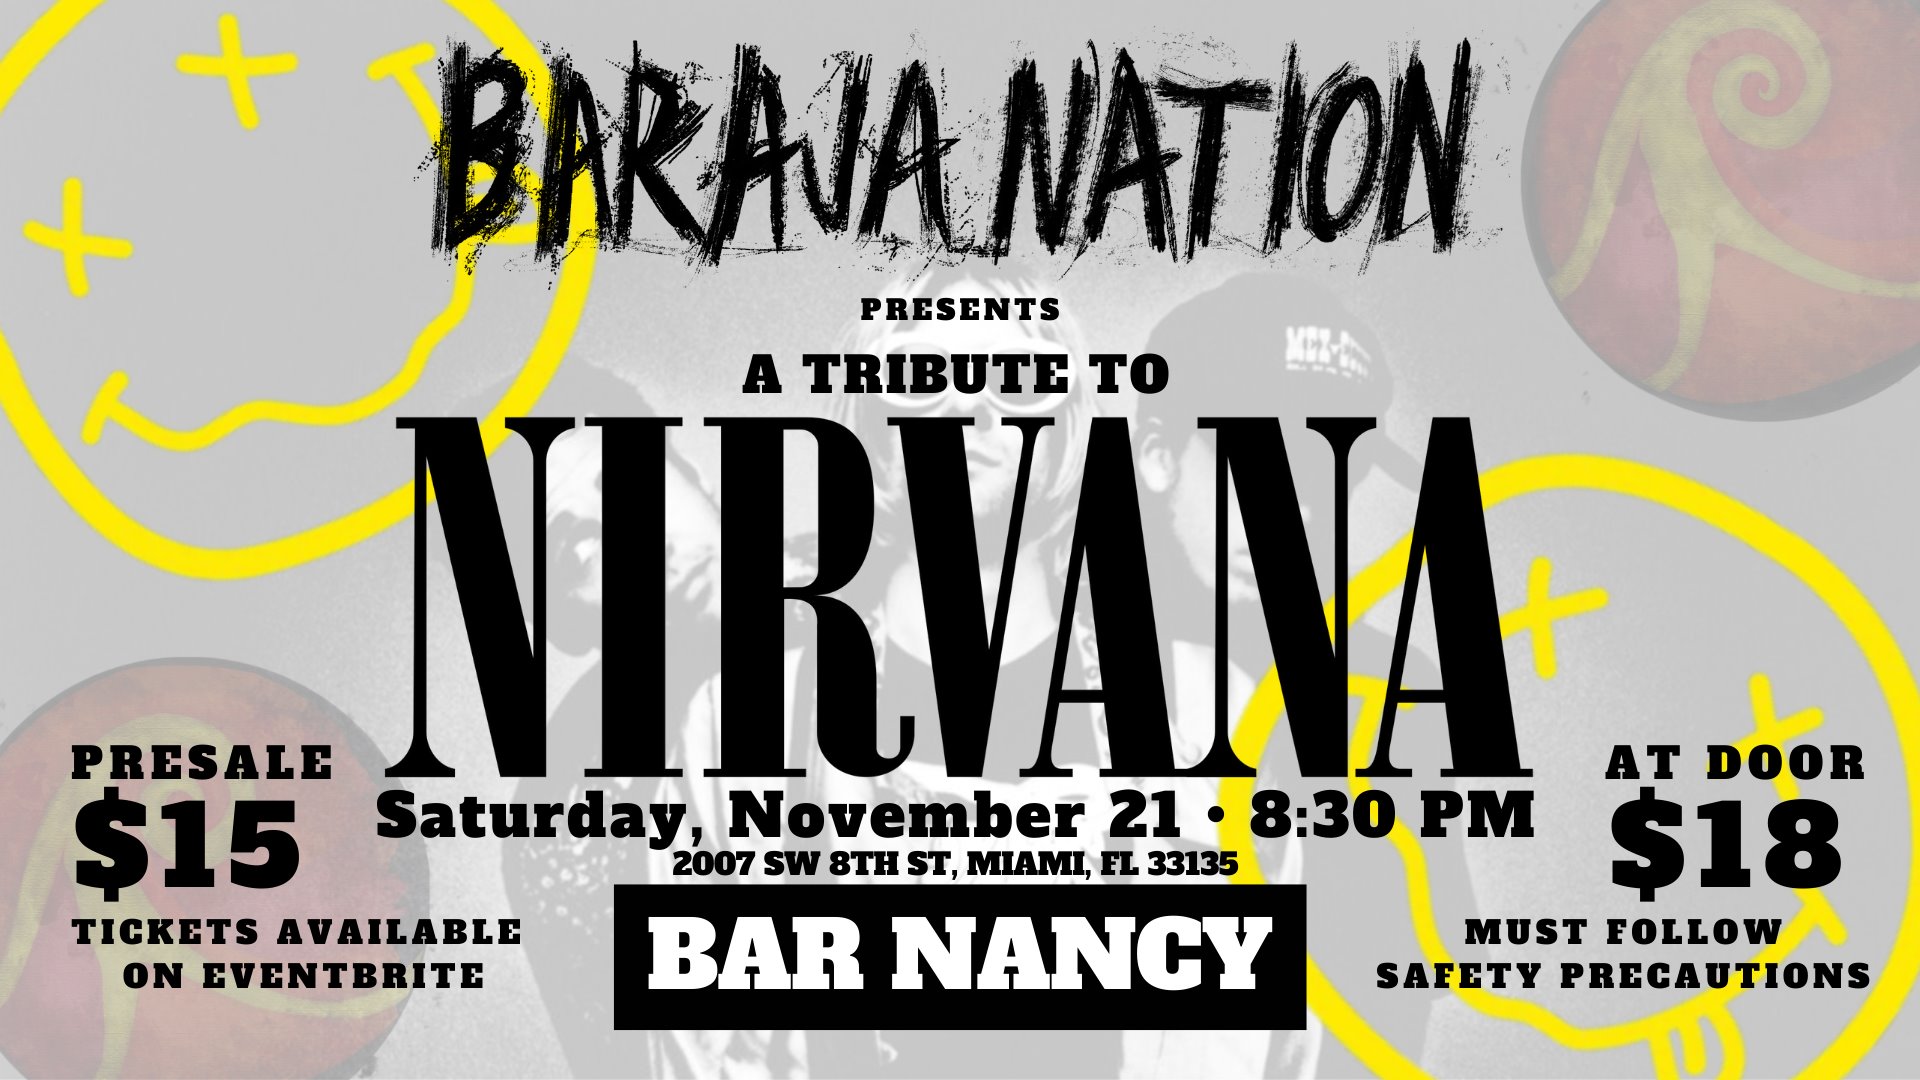 A TRIBUTE TO NIRVANA PRESENTED BY BARAJA NATION